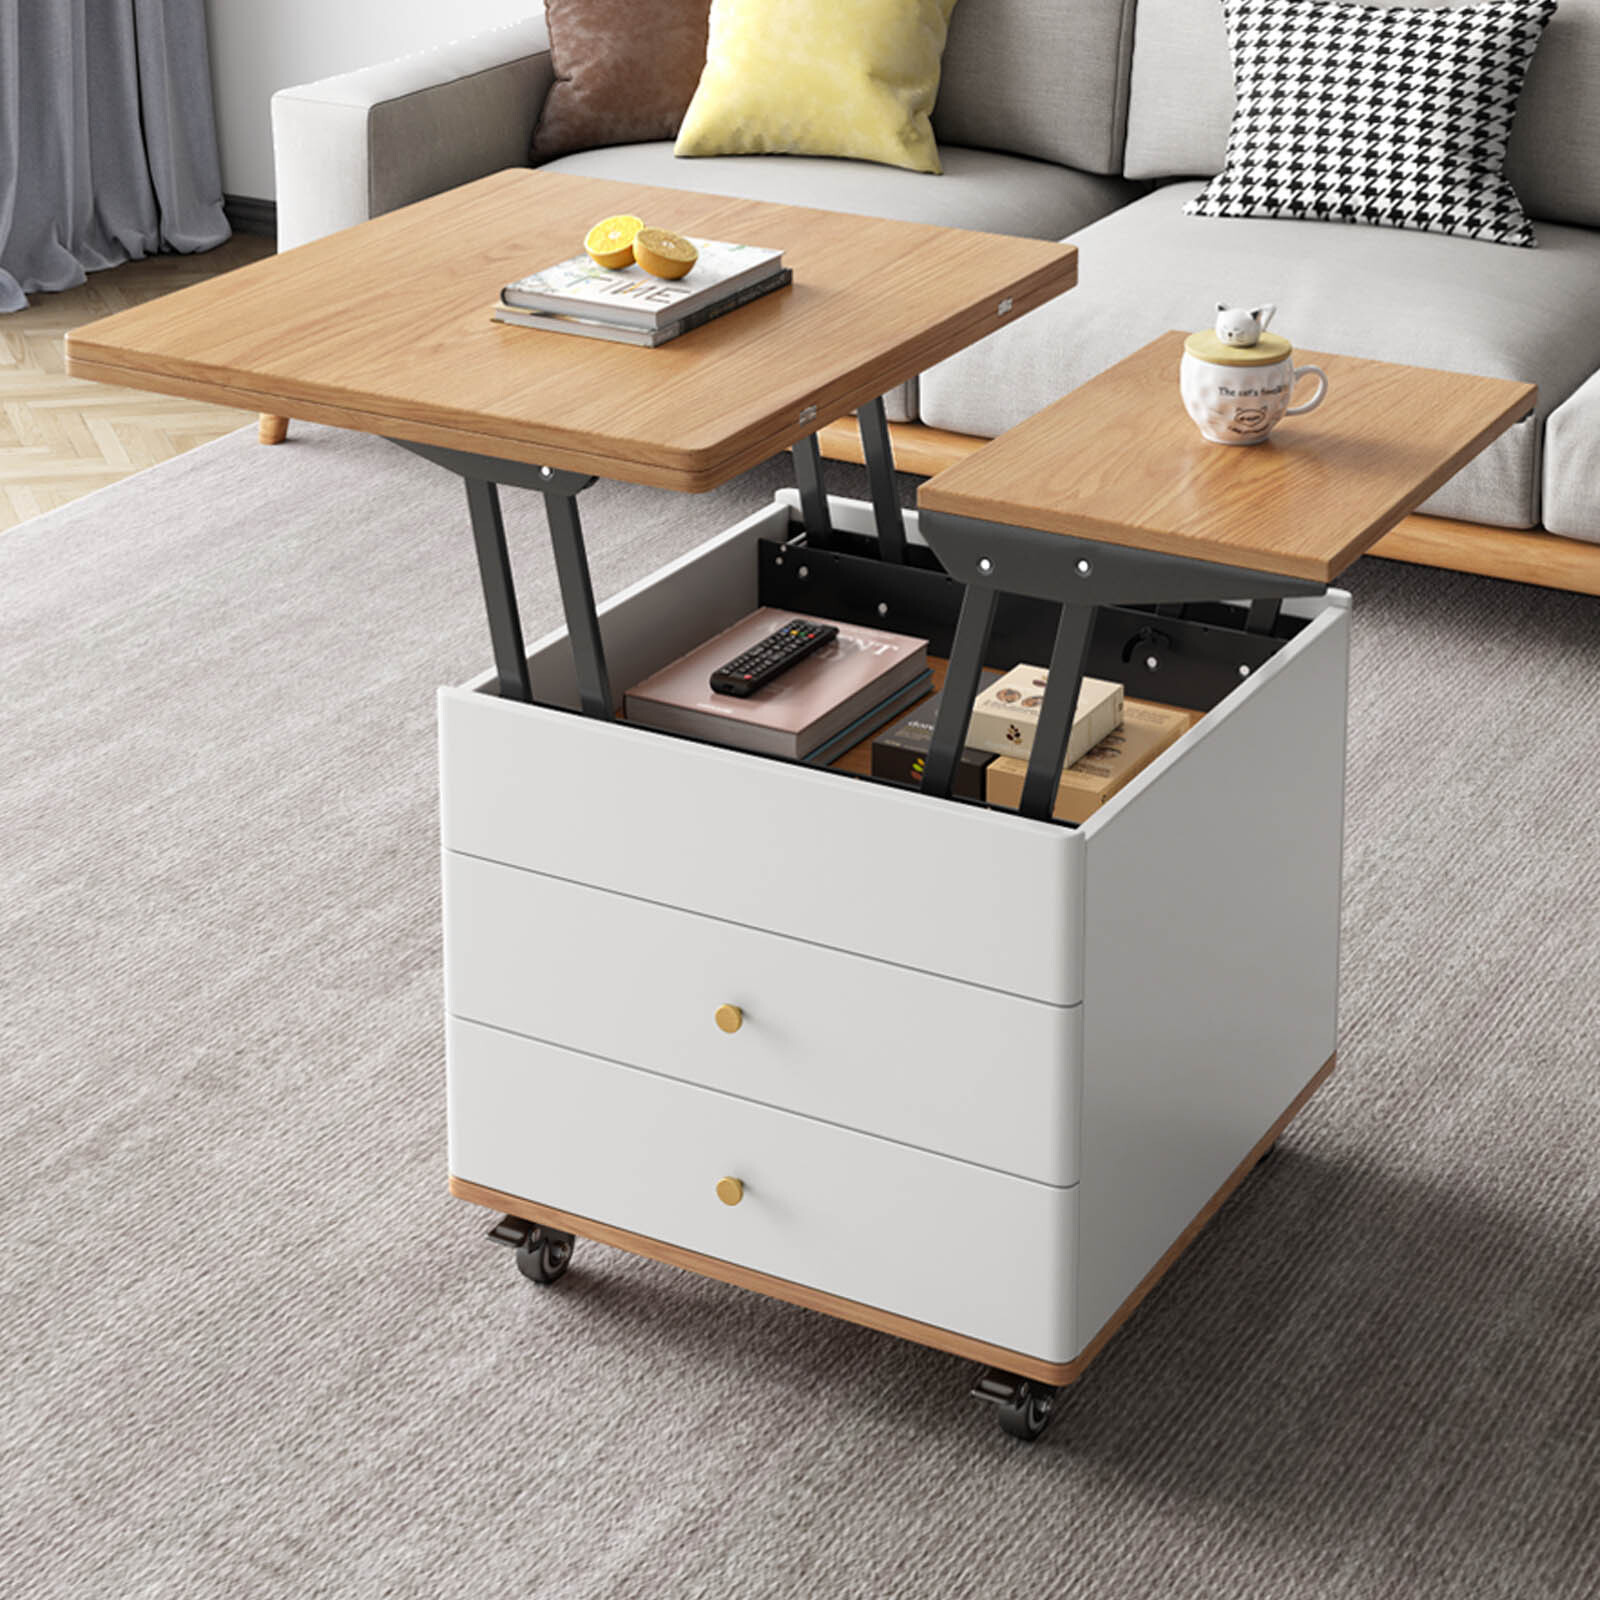 Guyii Lift-Top Multifunctional Coffee Table with Hidden Storage ...